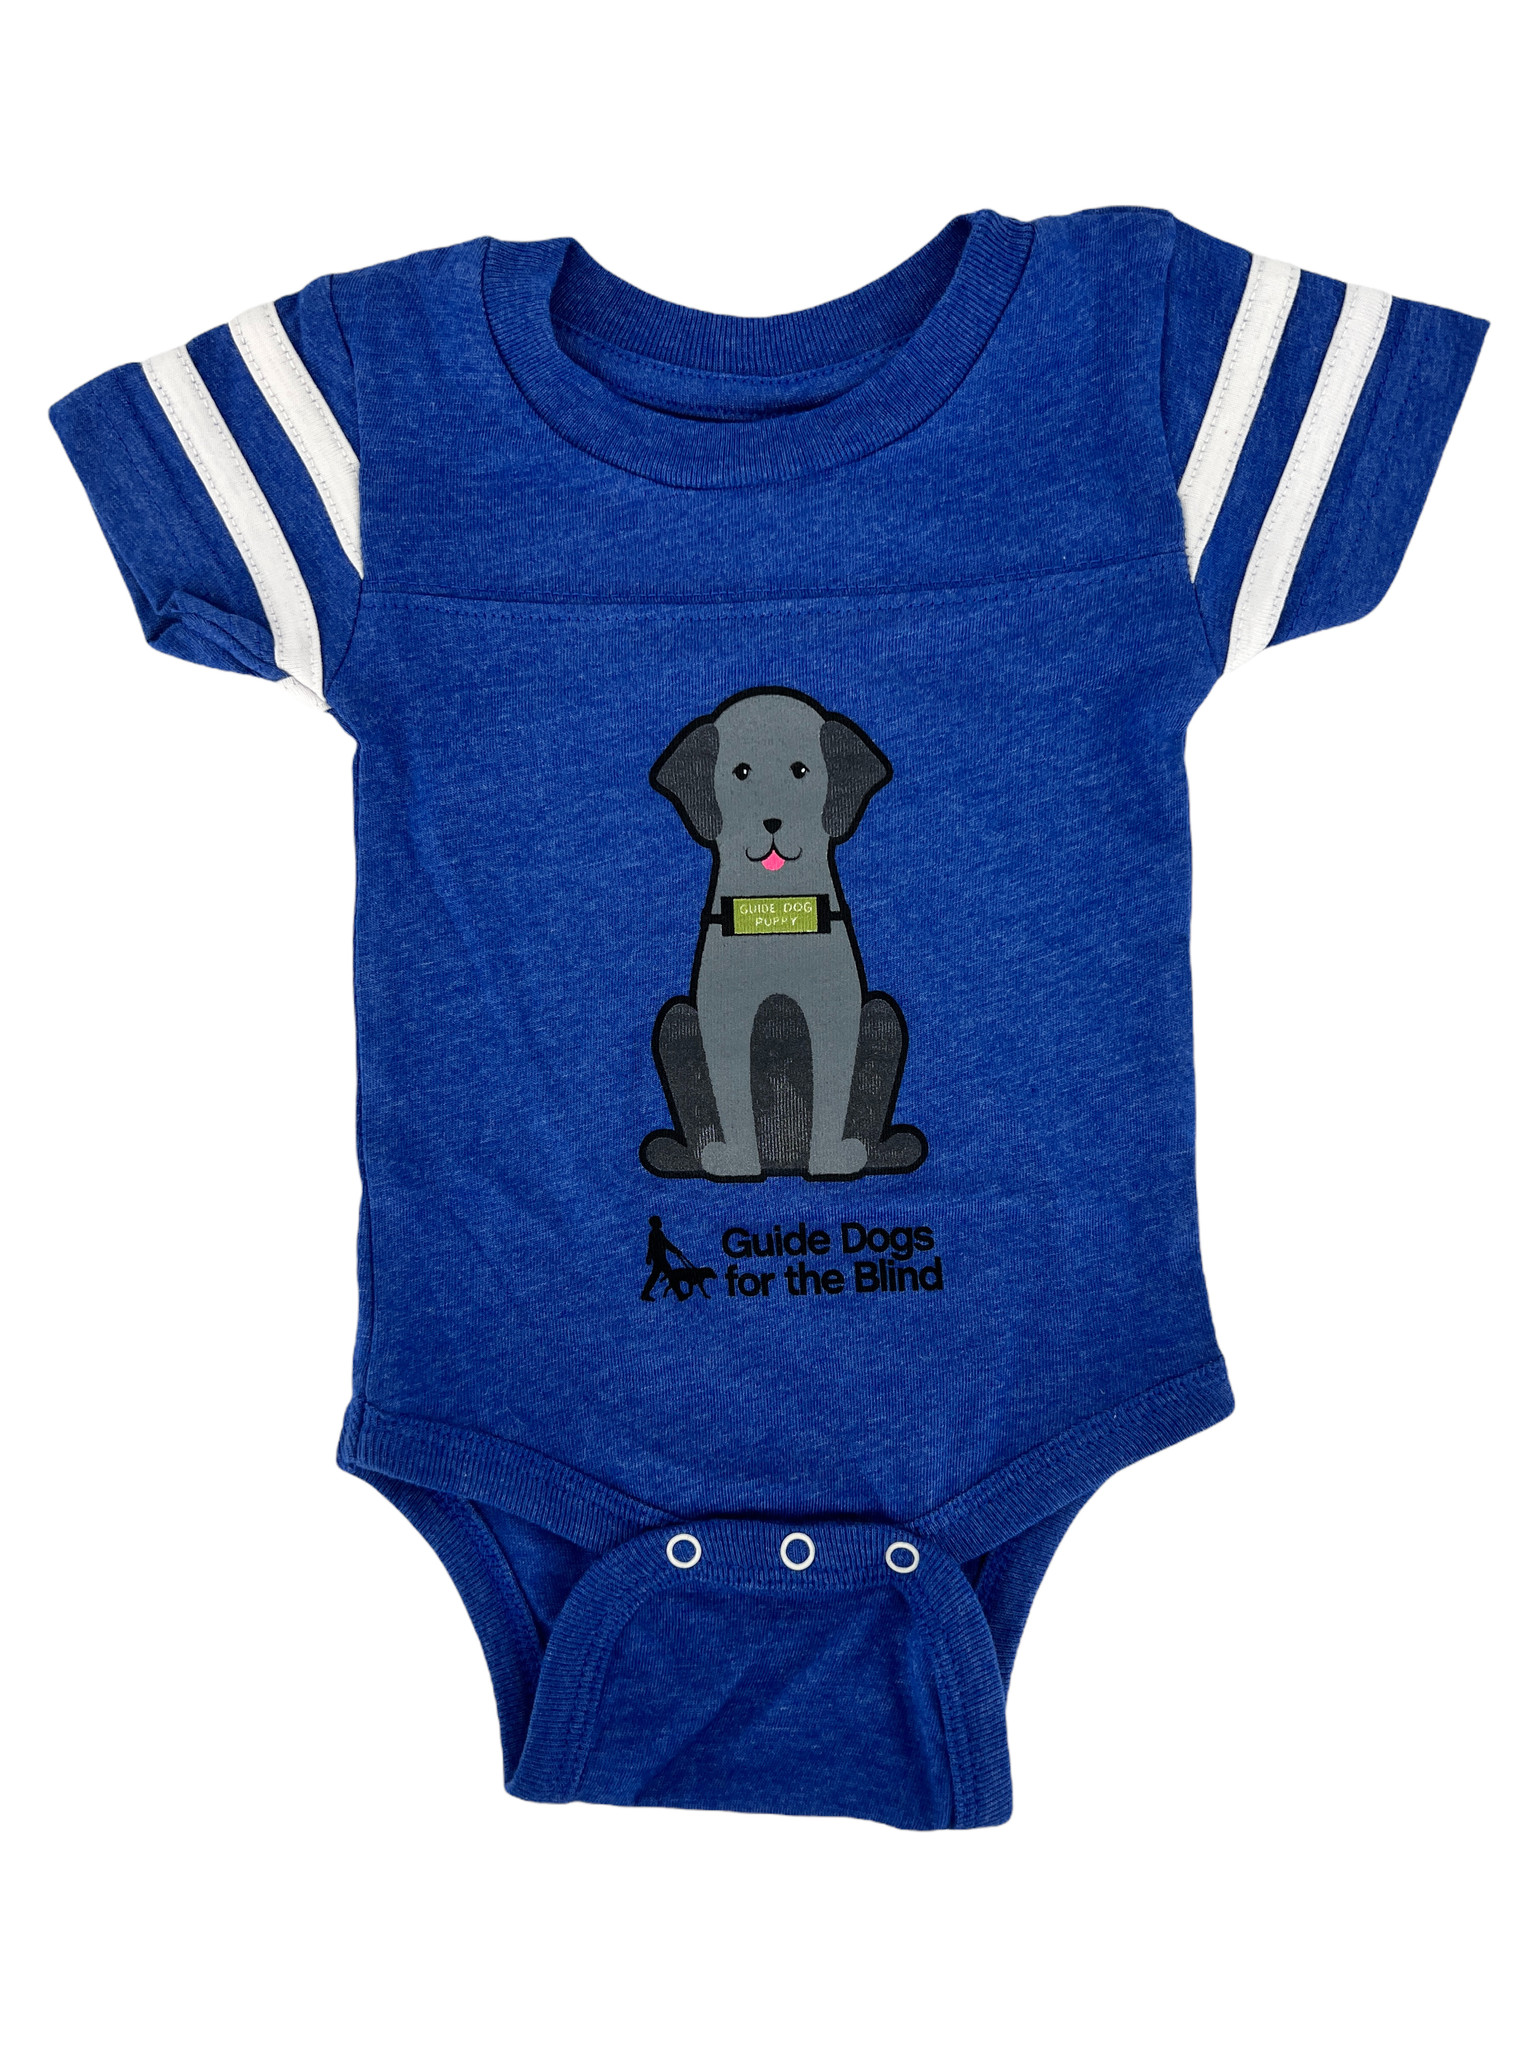 Onesie - black lab in puppy jacket - Guide Dogs for the Blind